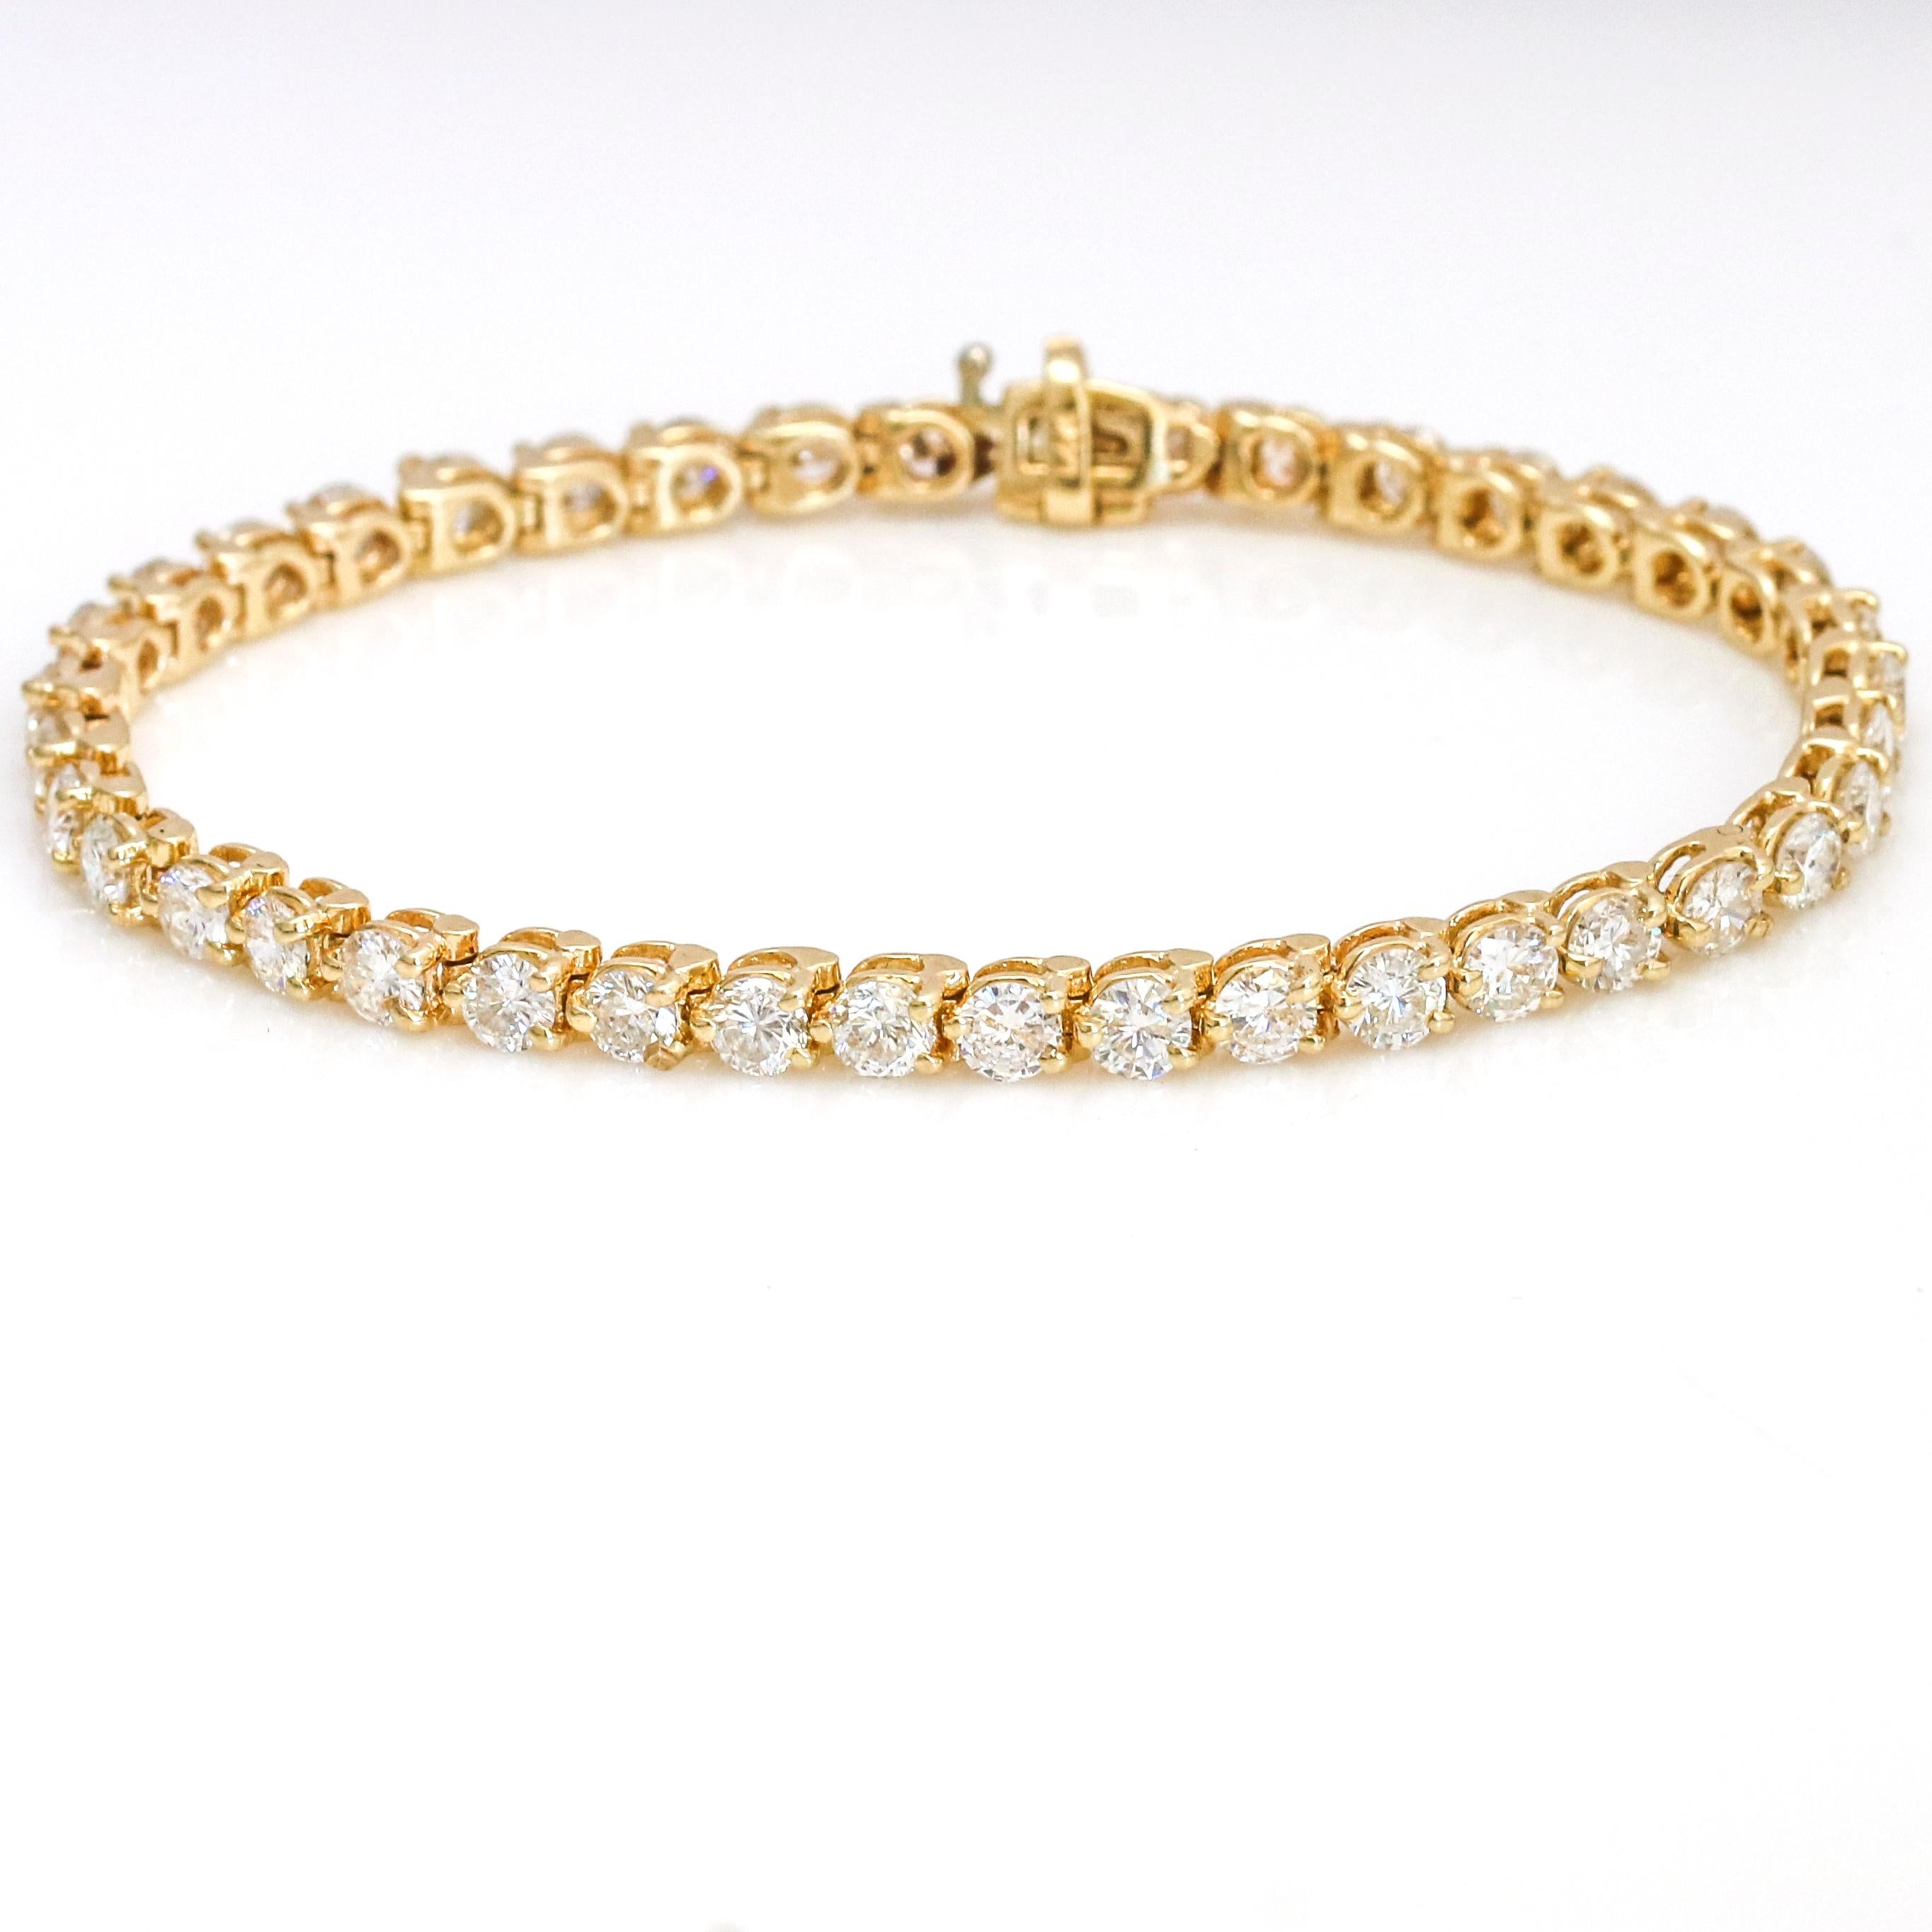 3-prong diamond tennis bracelet crafted in 14-karat yellow gold. The bracelet has 40 round brilliant diamonds. Slide clasp with safety.

Size, Medium (fits a wrist up to 6.5 inches)